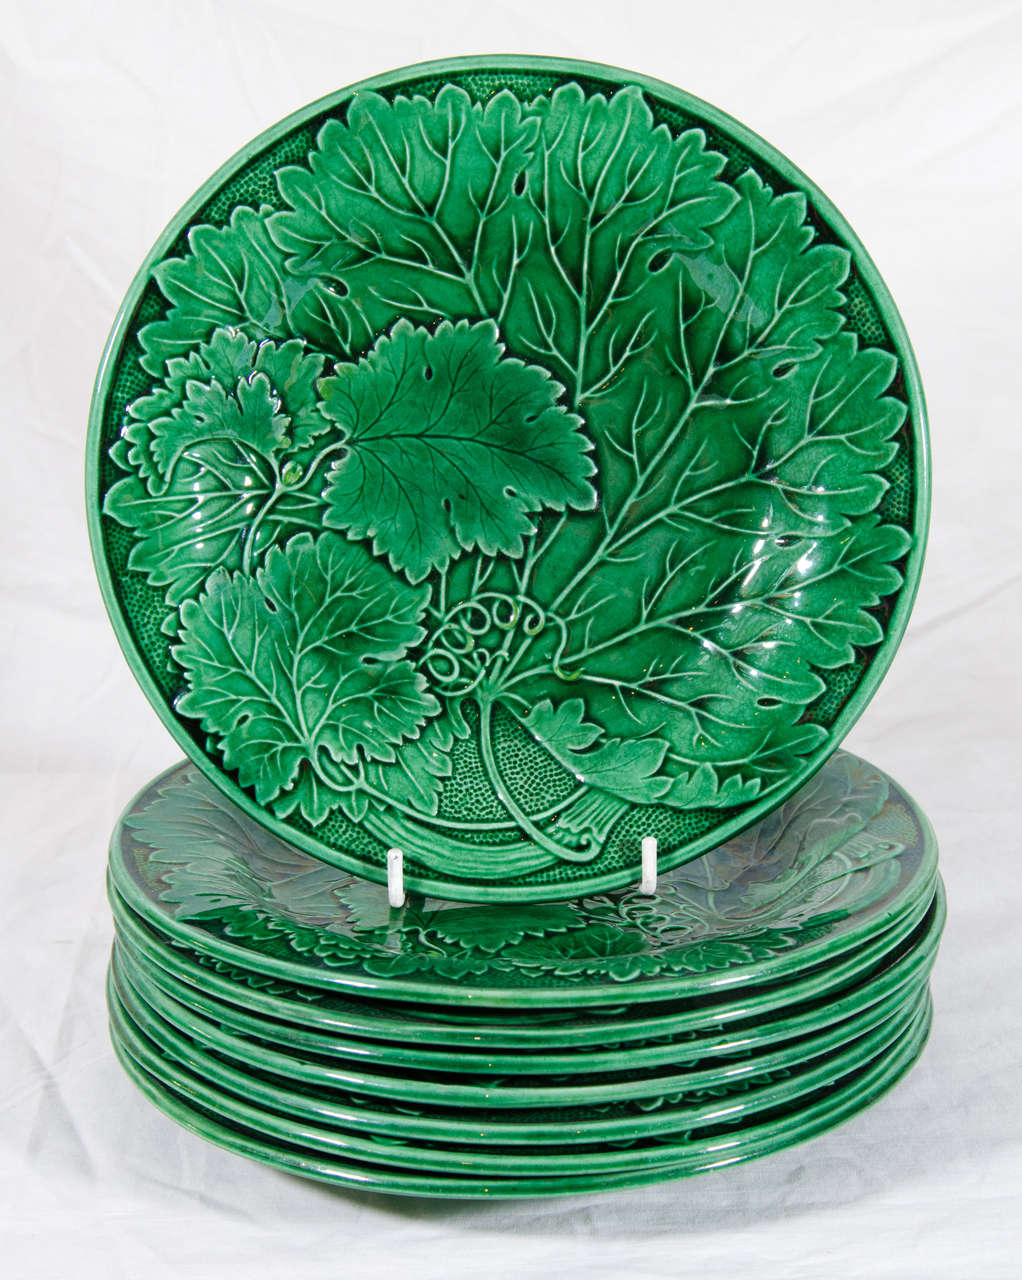 A set of eight 19th century English Majolica plates colored with a beautiful green glaze. The impressed design features a cluster of grape leaves.